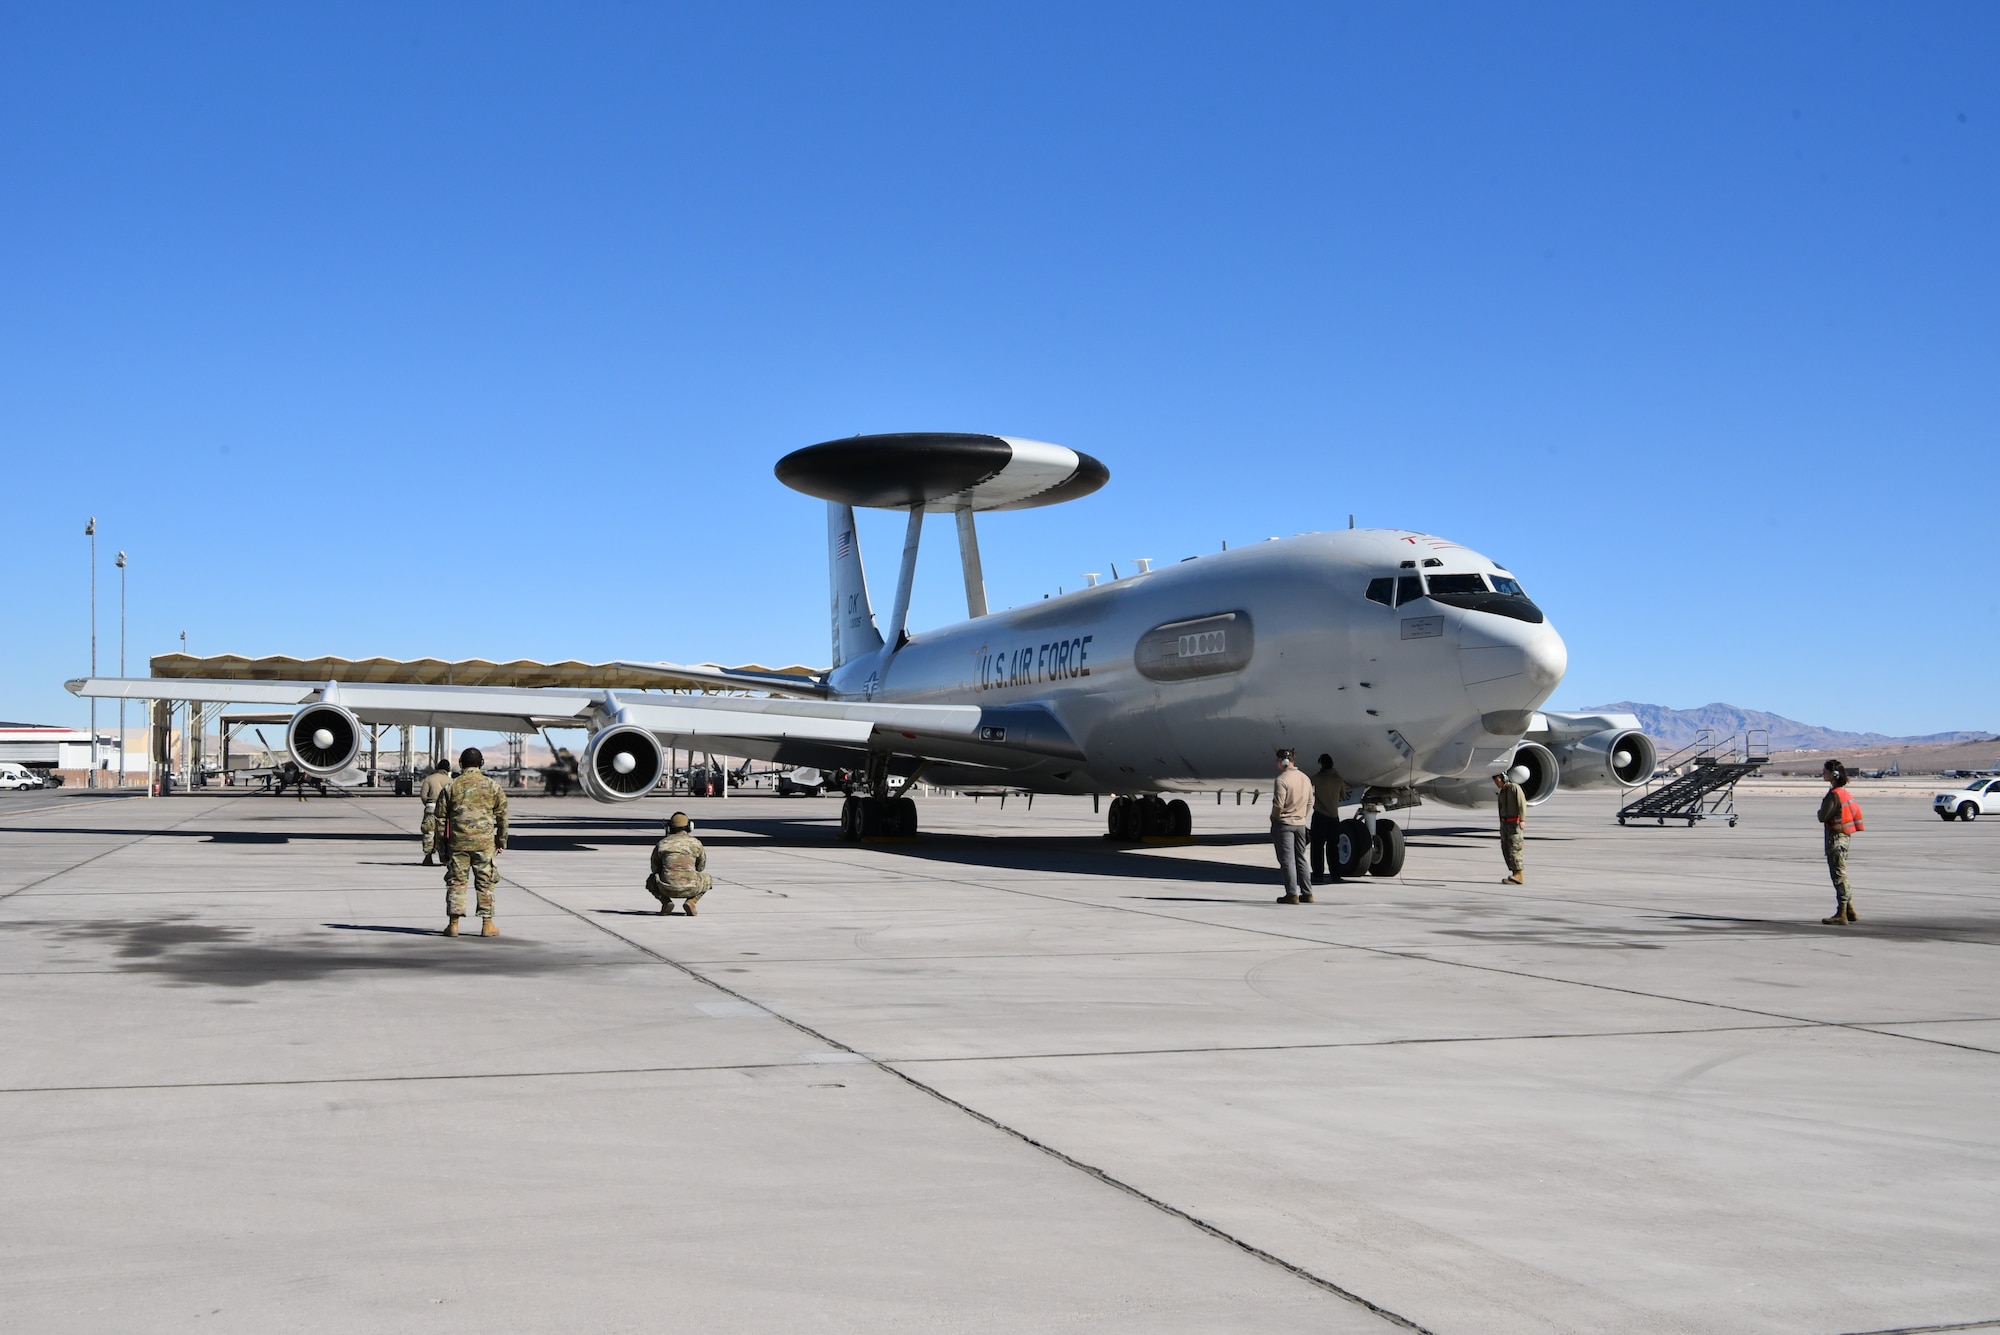 E-3A aircraft on ramp with maintenance personnel performing checks